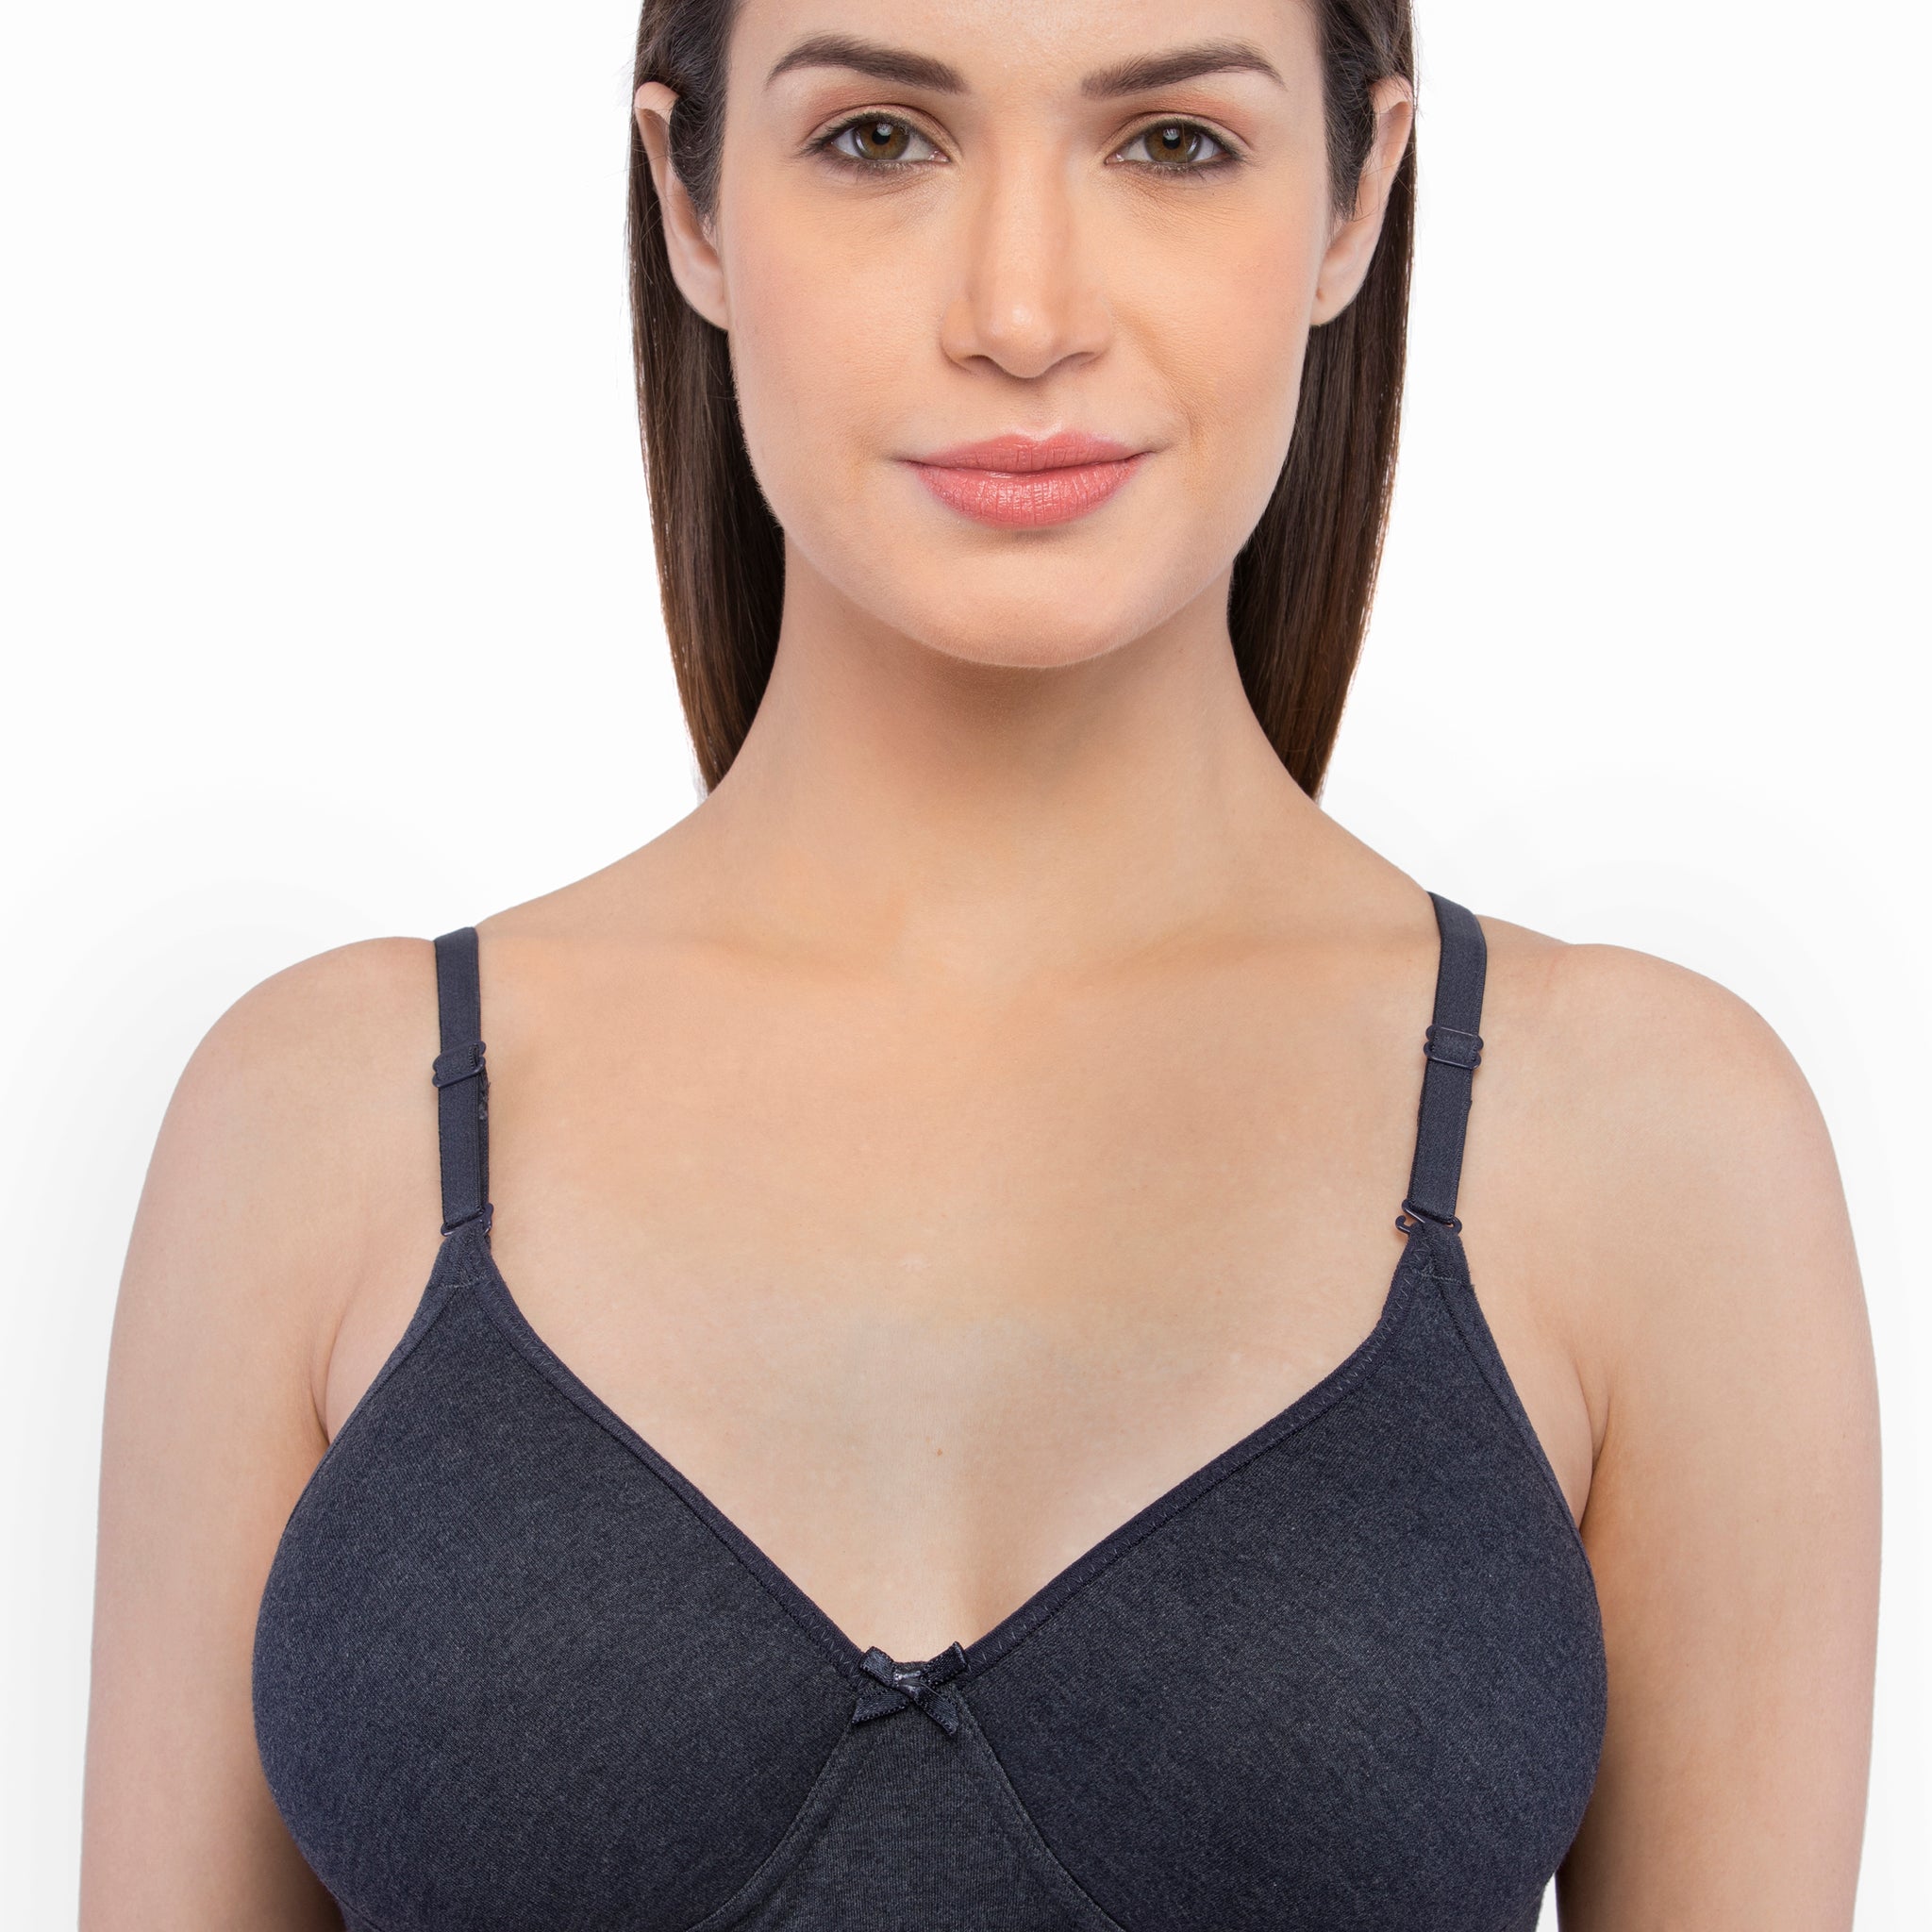 Buy Avani creation women/girl's black colour new stylish fancy t-back sport  bra pack of 1 Online In India At Discounted Prices